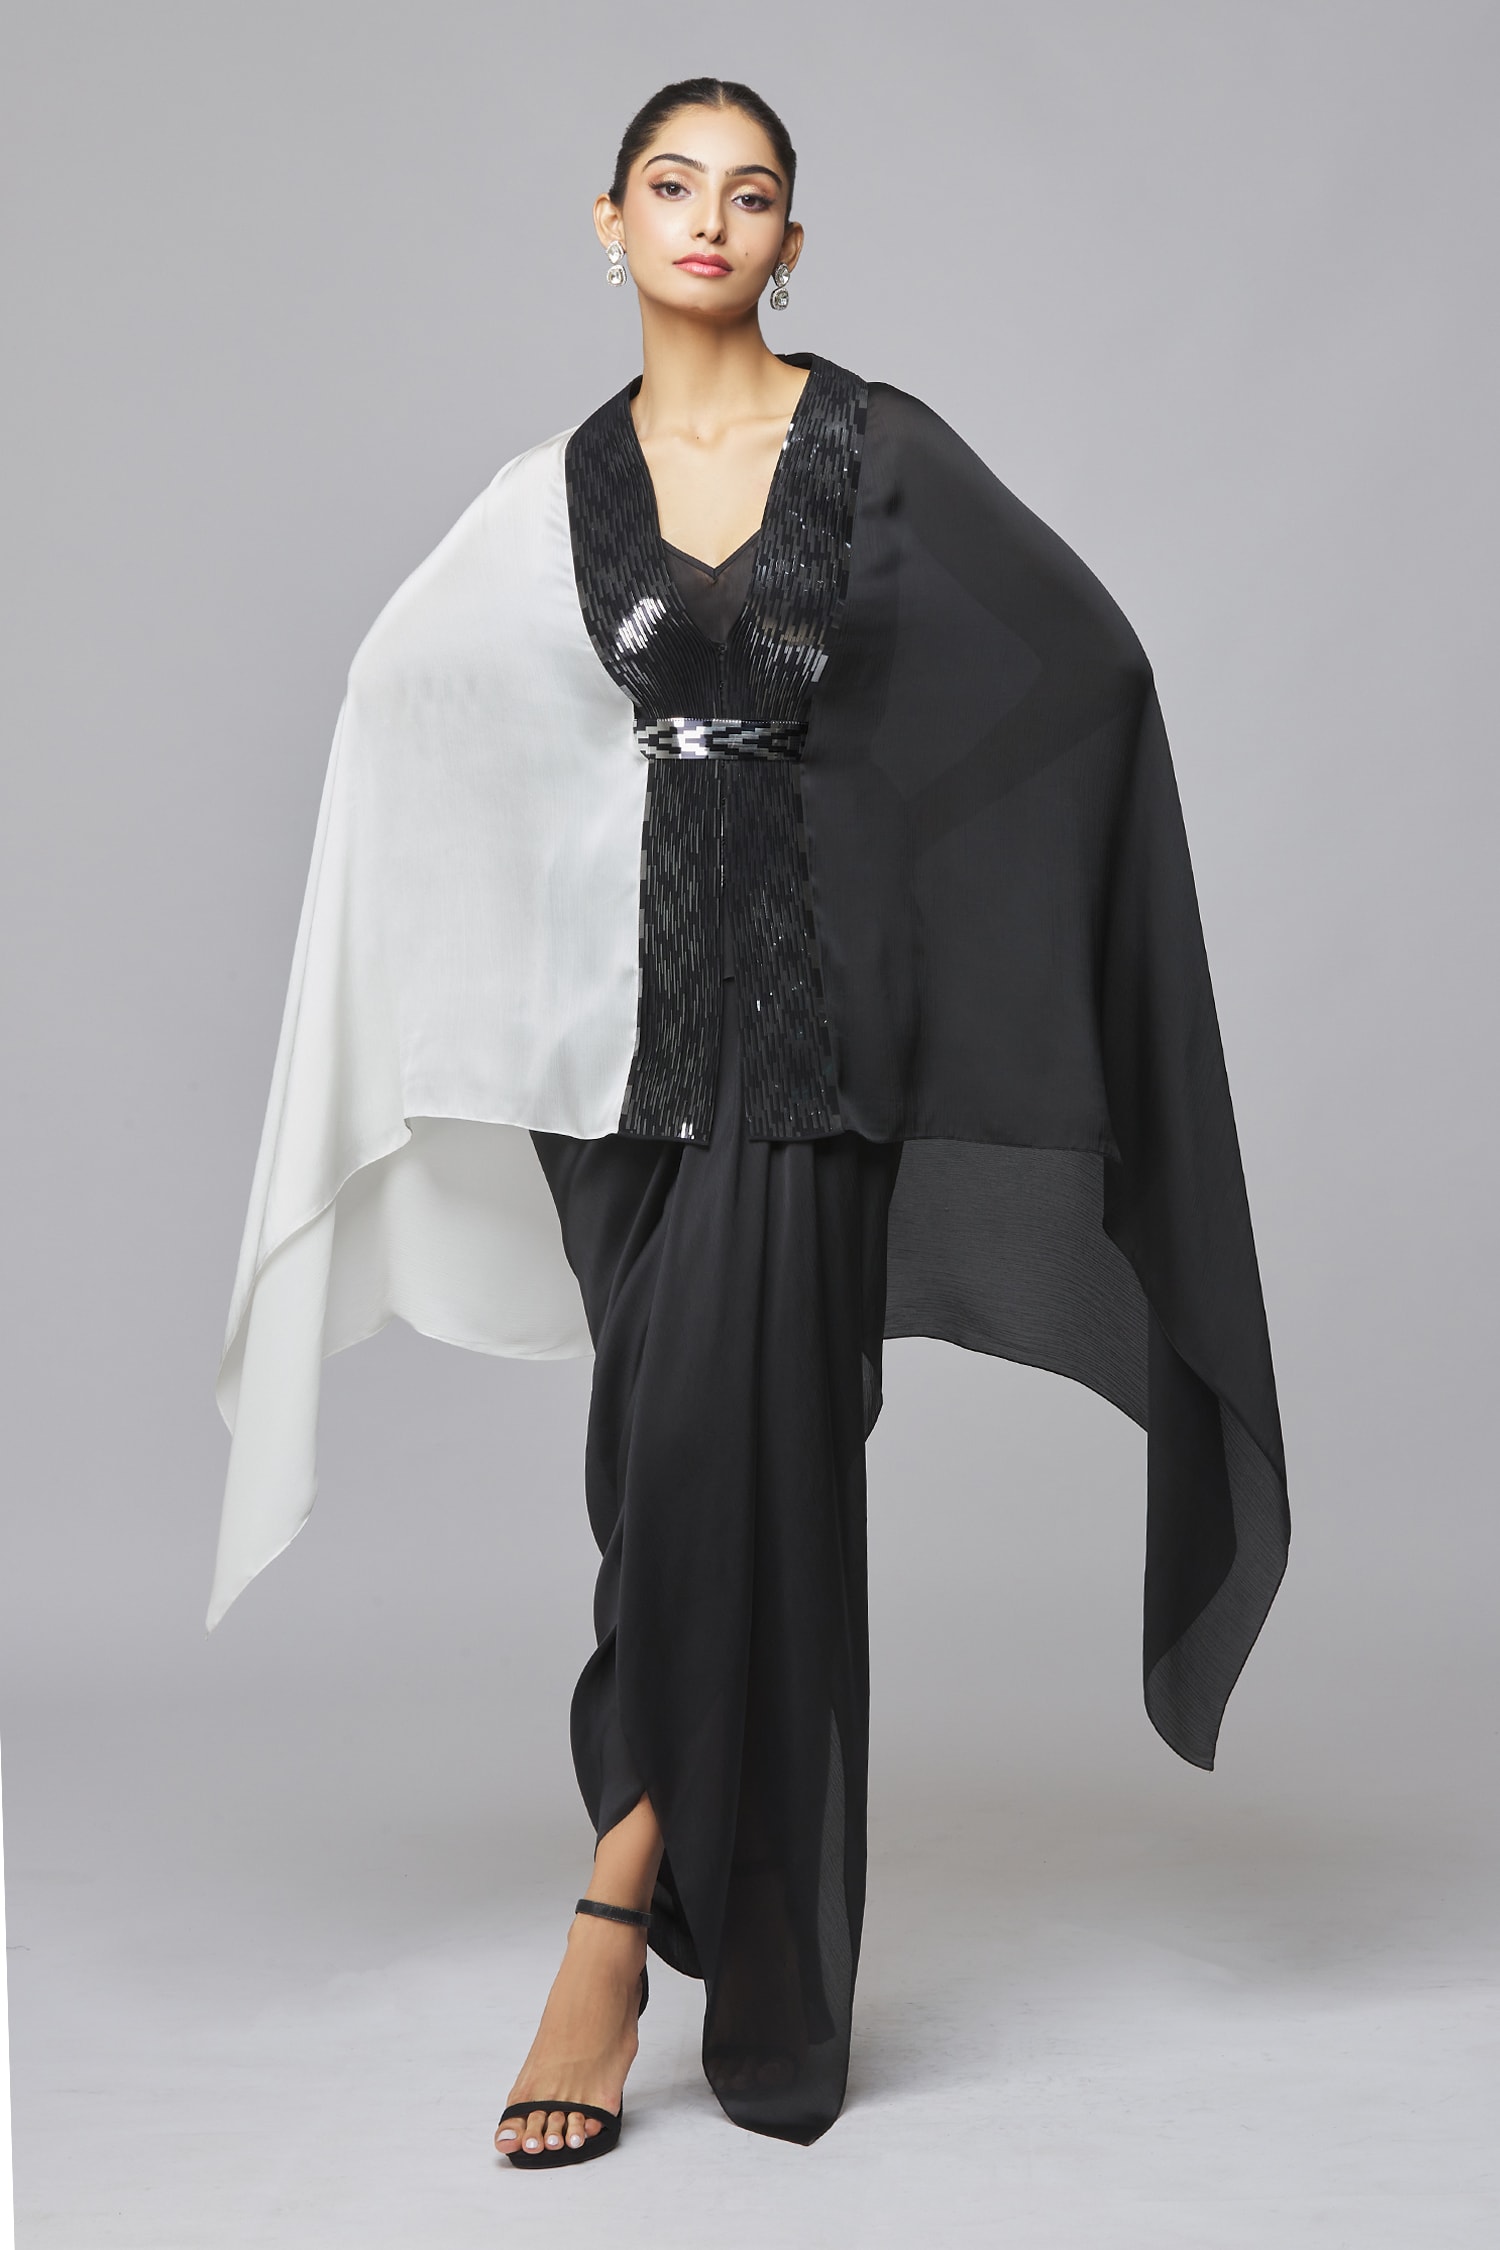 Amit Aggarwal Black Chiffon Colorblock Cape With Inner